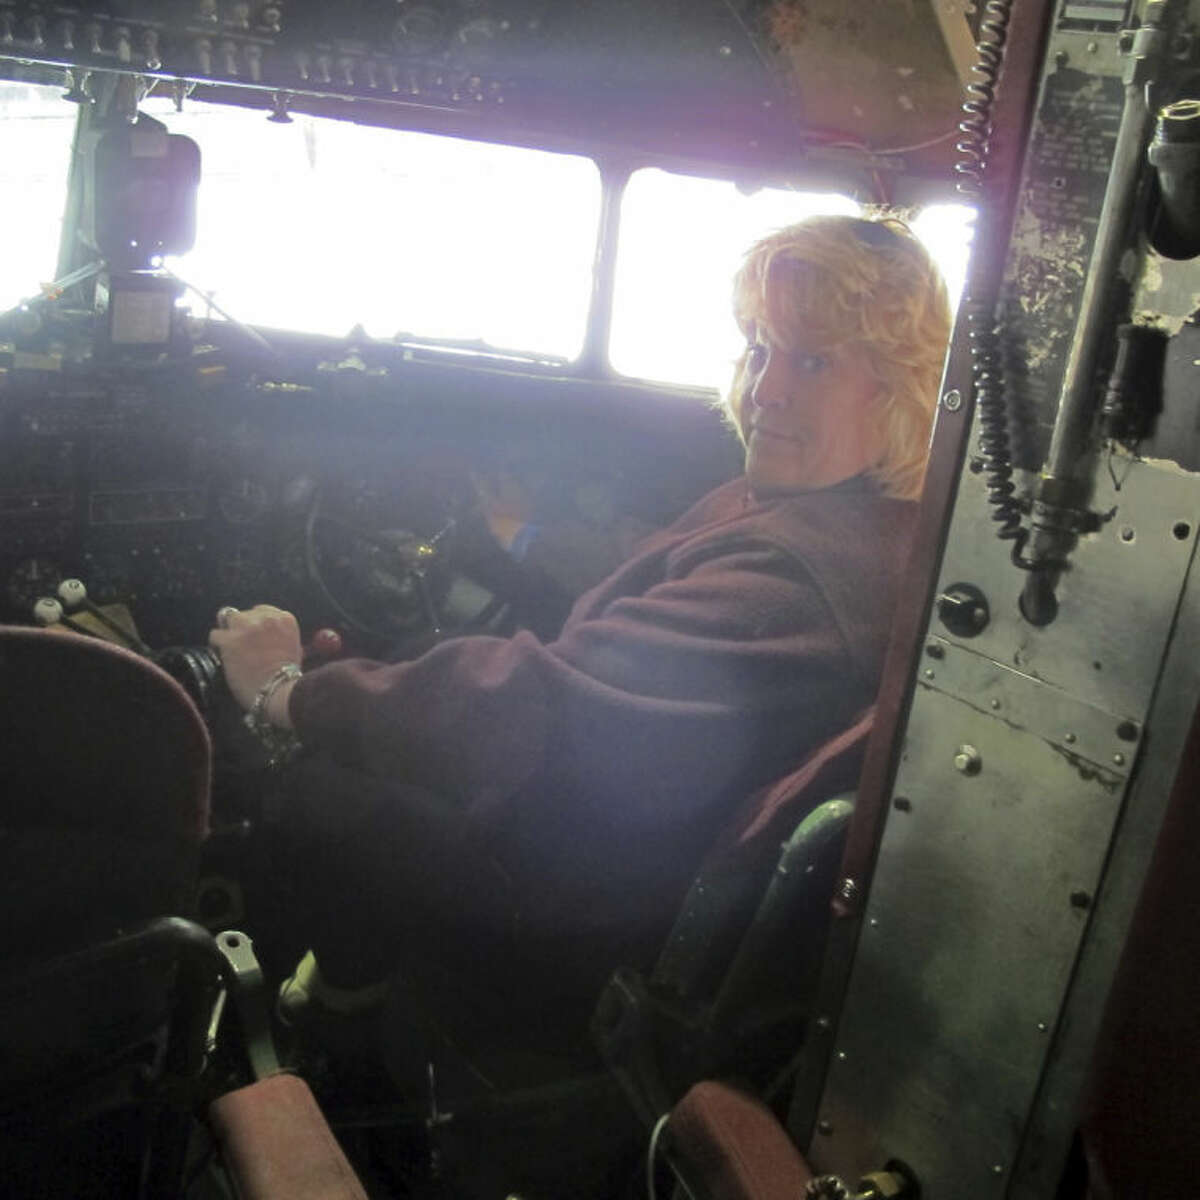 This photo taken March 6, 2014, shows pilot Naomi Wadsworth inside the cockpit of a World War II-era Douglas C-47, housed at the National Warplane Museum in Geneseo, N.Y. At the invitation of the French government, the airplane will return to France in June to participate in celebrations marking the 70th anniversary of the D-Day invasion of Normandy. The airplane, known as Whiskey 7 because of its markings, is one of the original troop carriers that dropped paratroopers in advance of the amphibious invasion. In June it will recreate its role and drop paratroopers over the original drop zone in Sainte-Mere-Eglise. (AP Photo/Carolyn Thompson)